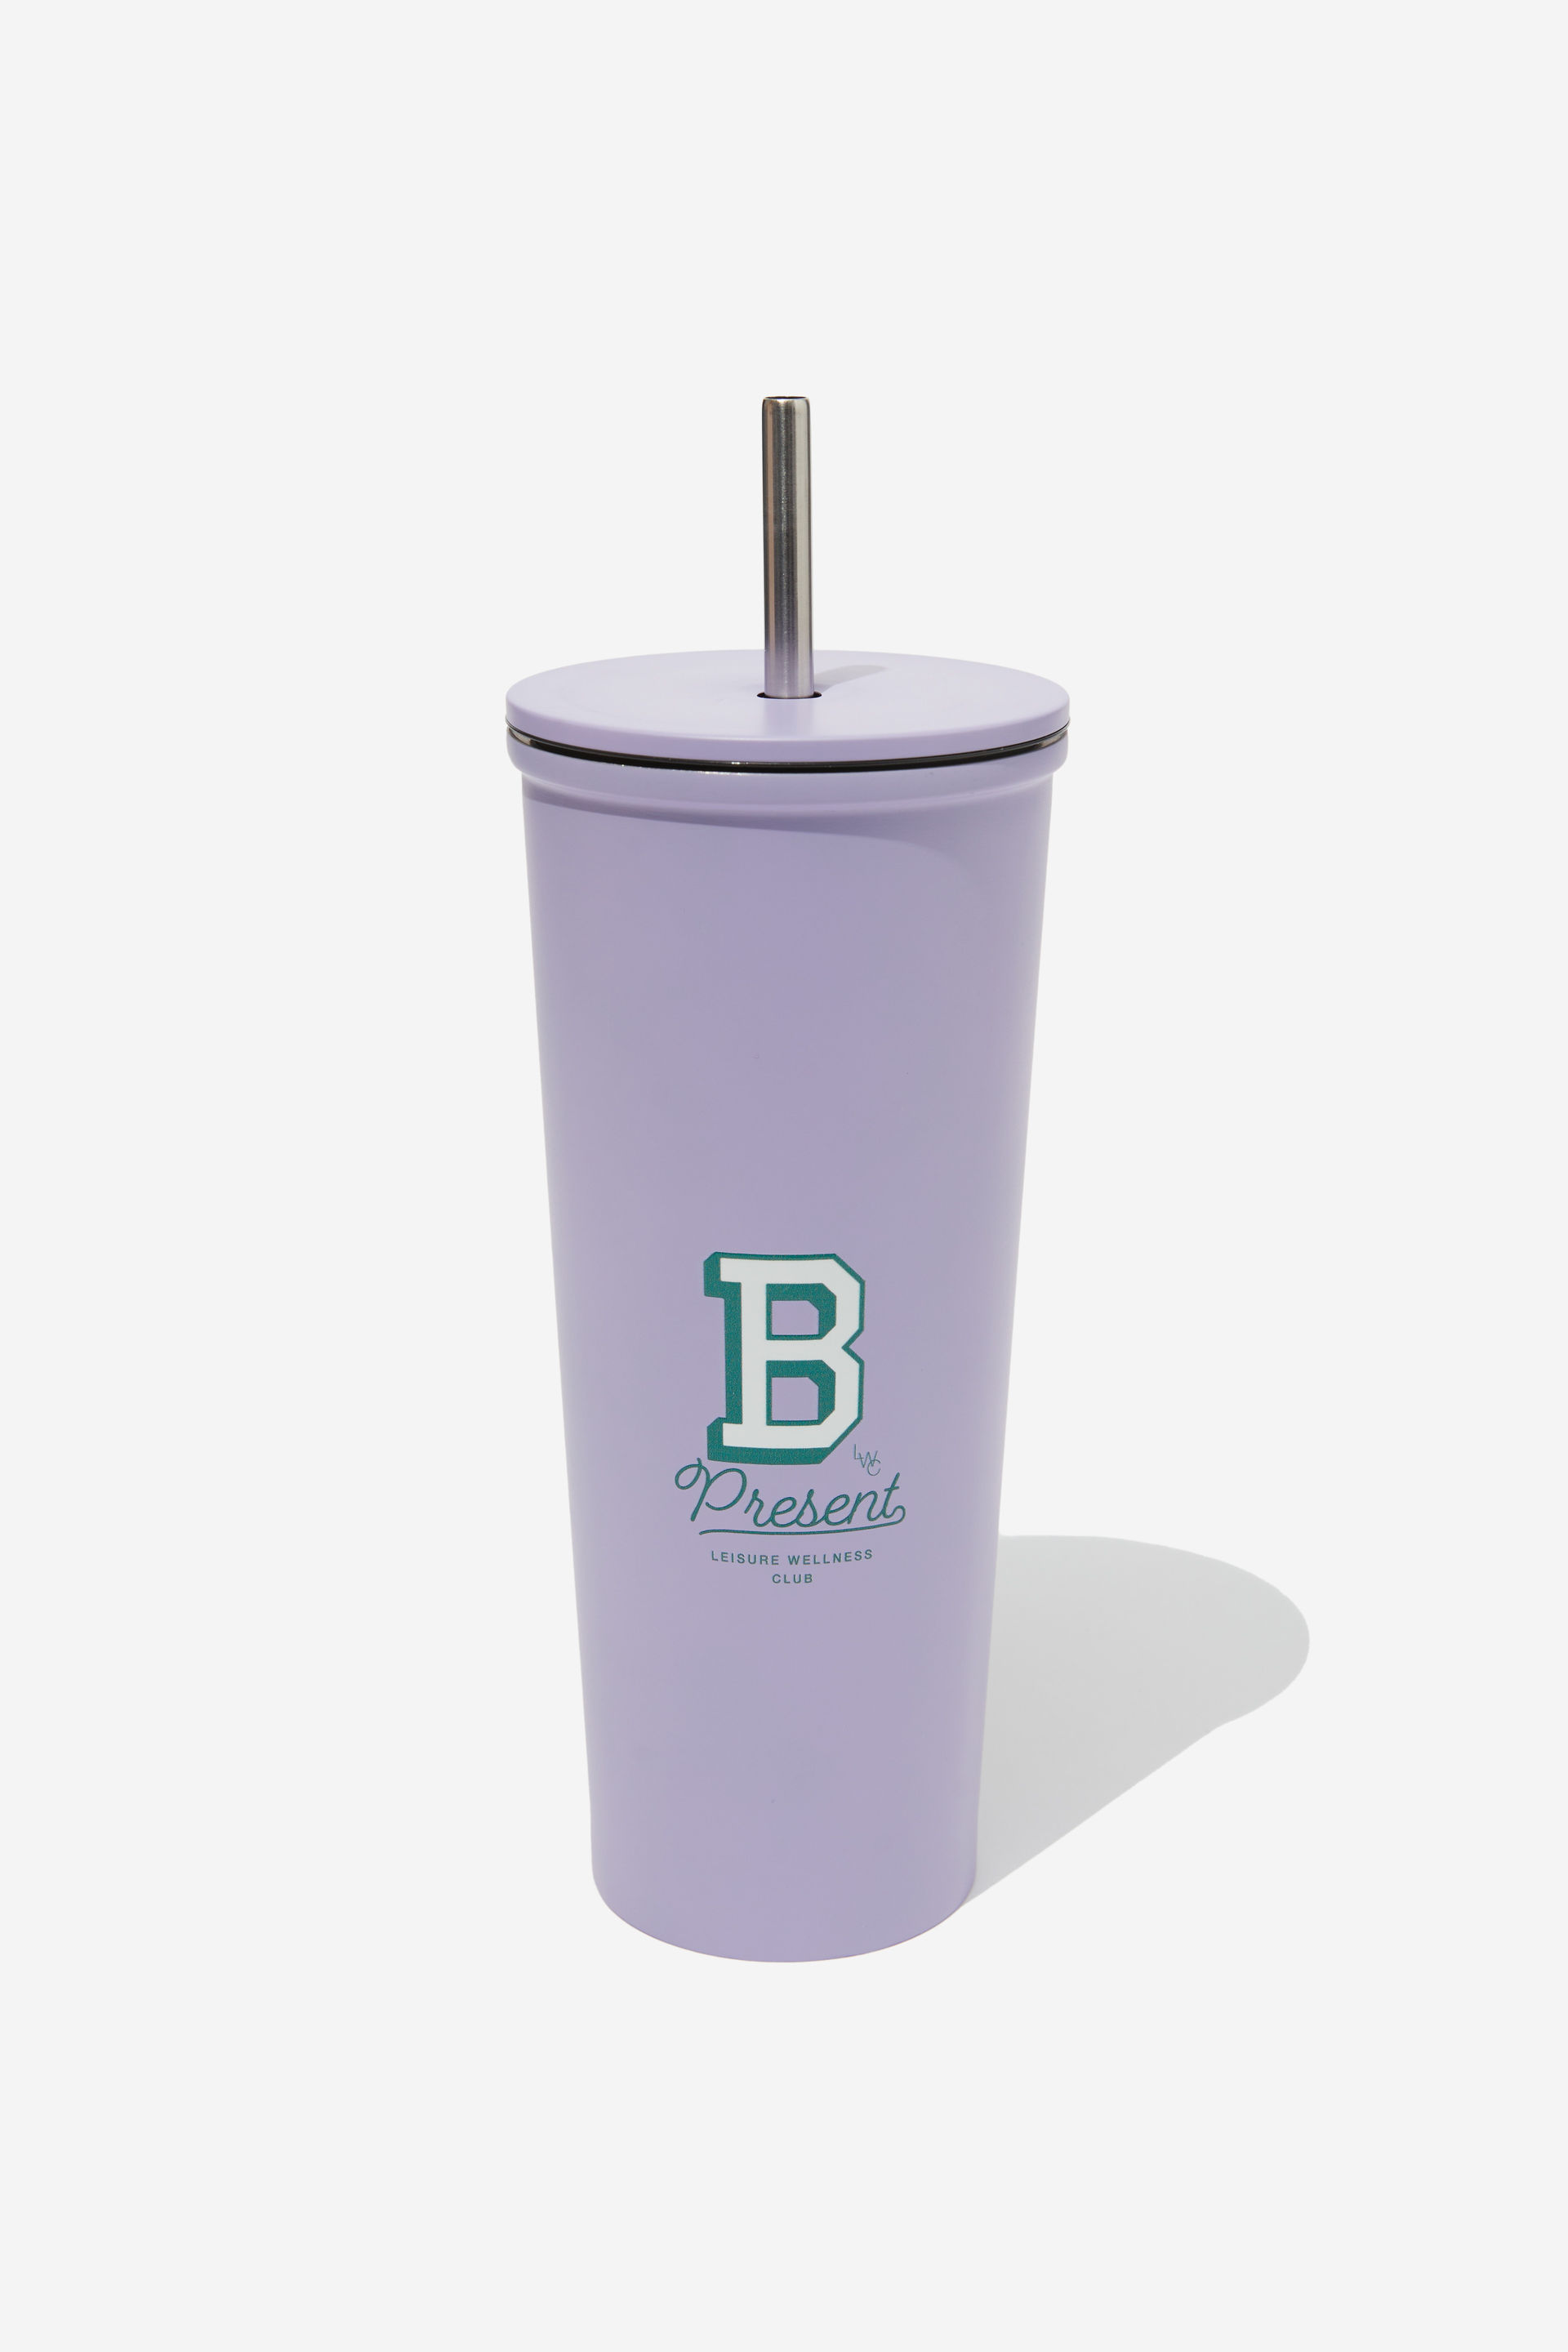 Typo - Metal Smoothie Cup - Be present lilac